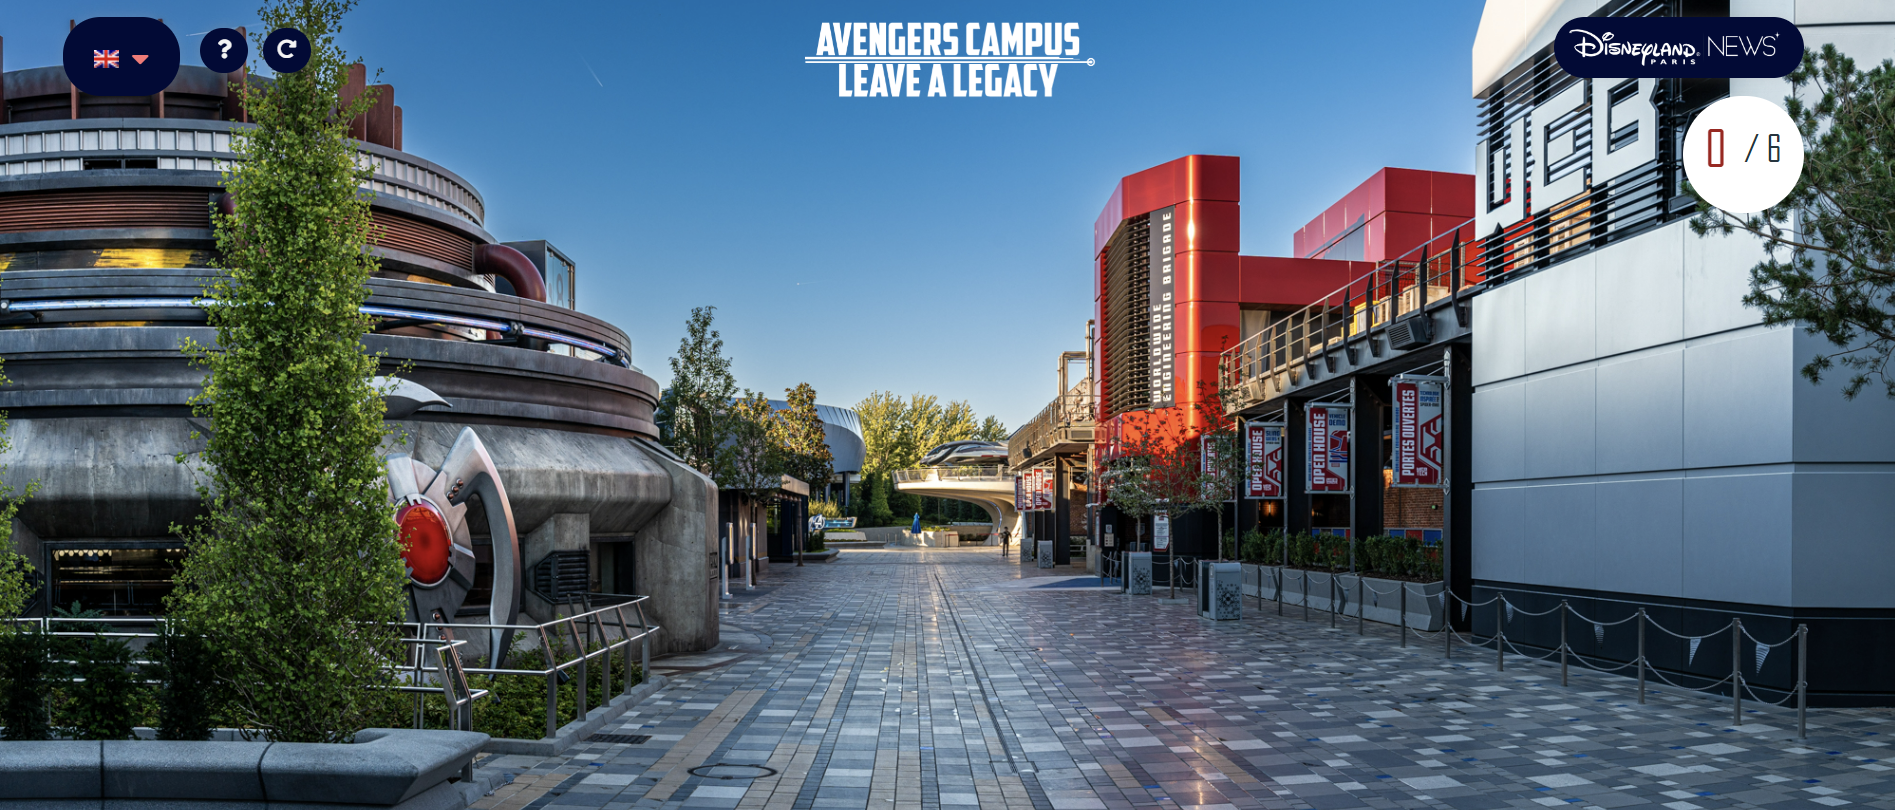 “Leave A Legacy” Win a place at a Private Event in Avengers Campus, Disneyland Paris